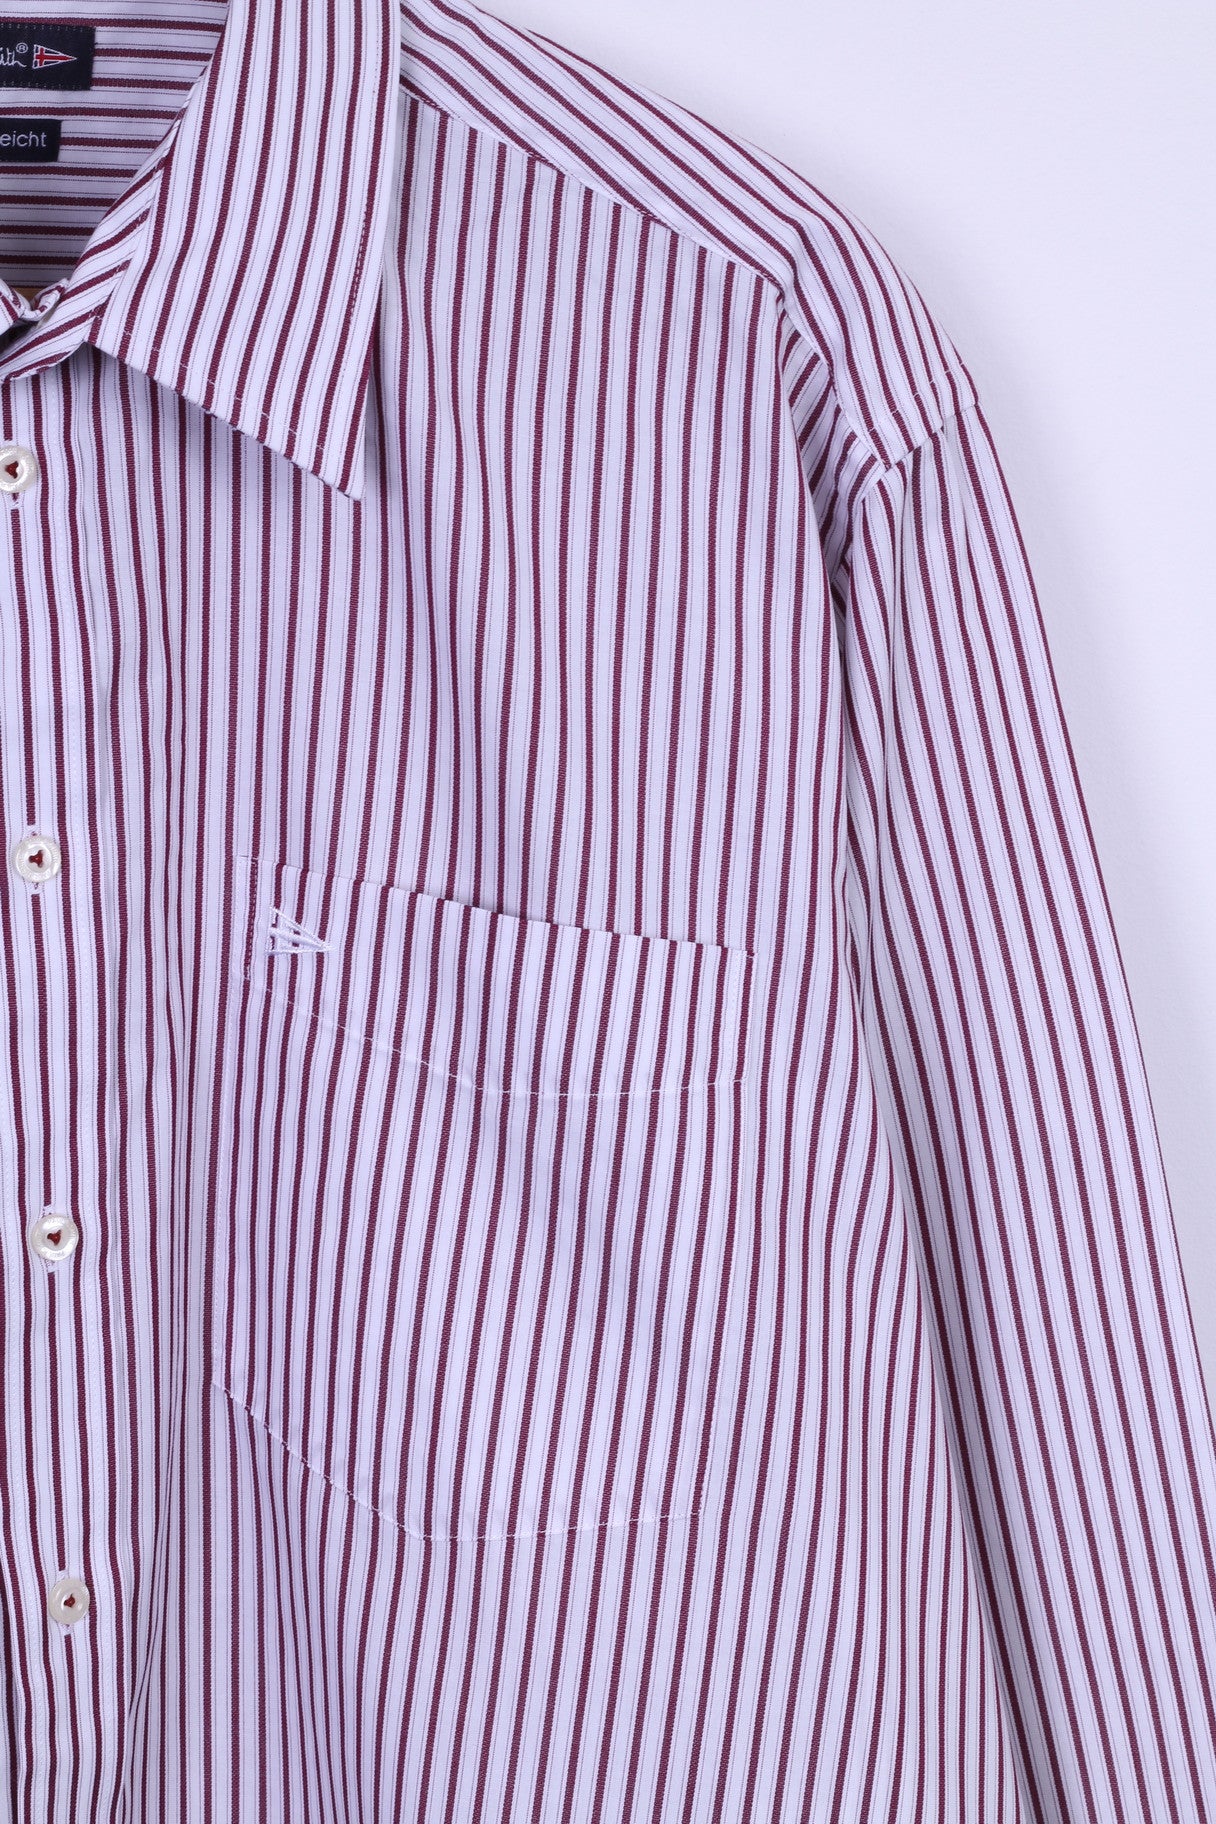 Paul R. Smith Mens 44 XL Casual Shirt Cotton Burgundy Striped Detailed Buttons